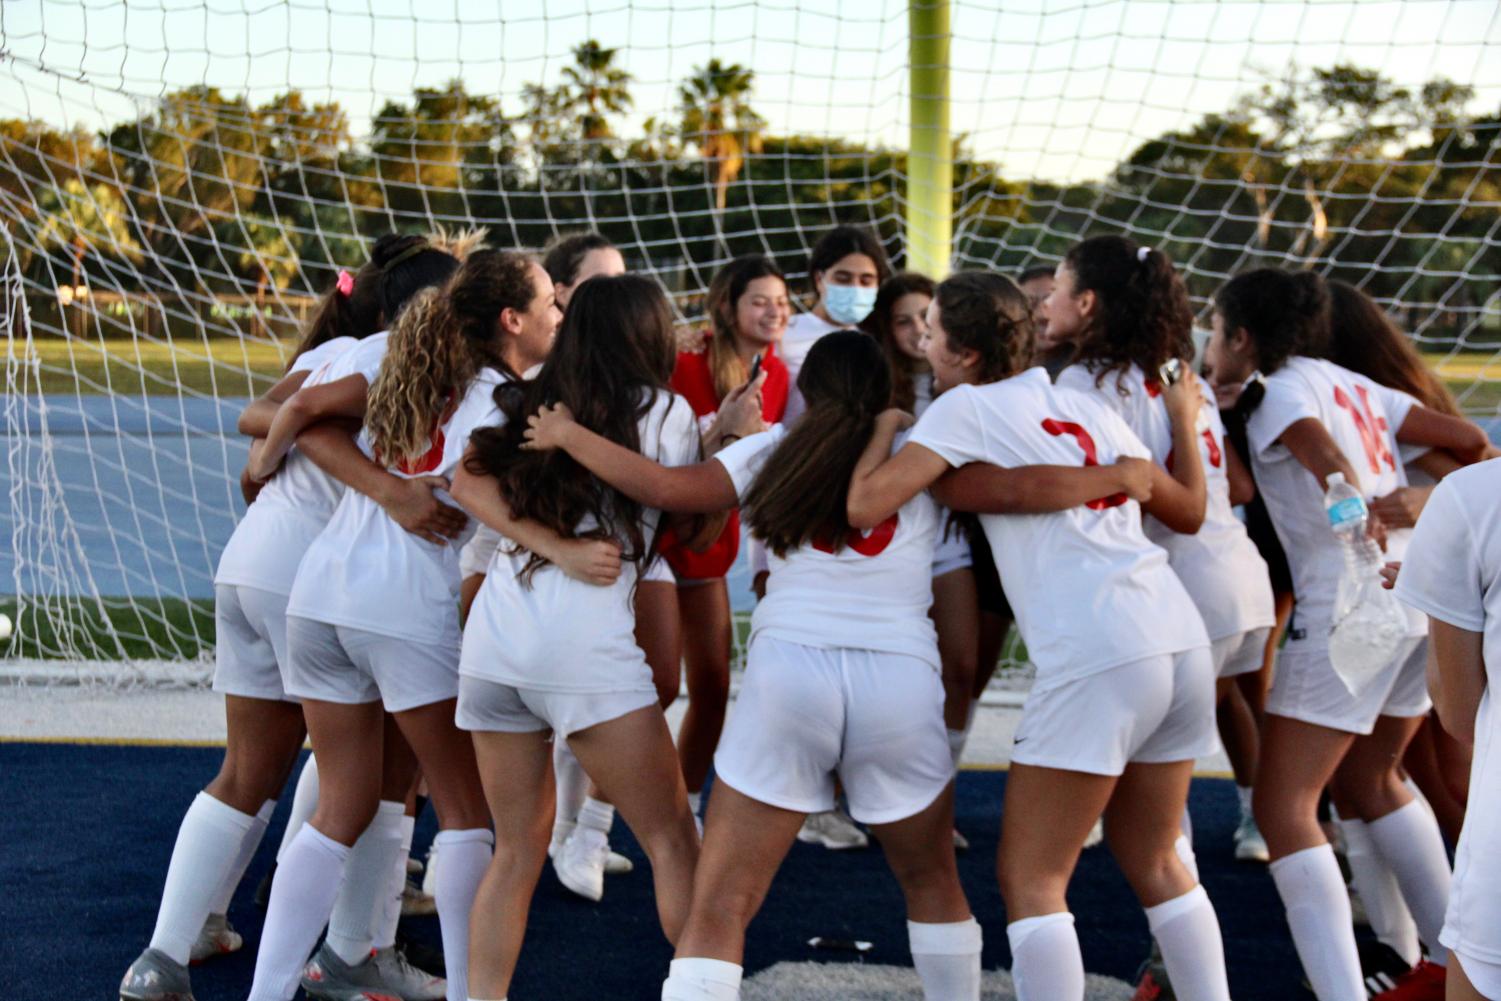 Girls+Soccer+District+Championship%3A+Gables+Cavaliers+VS+Miami+High+Stingarees